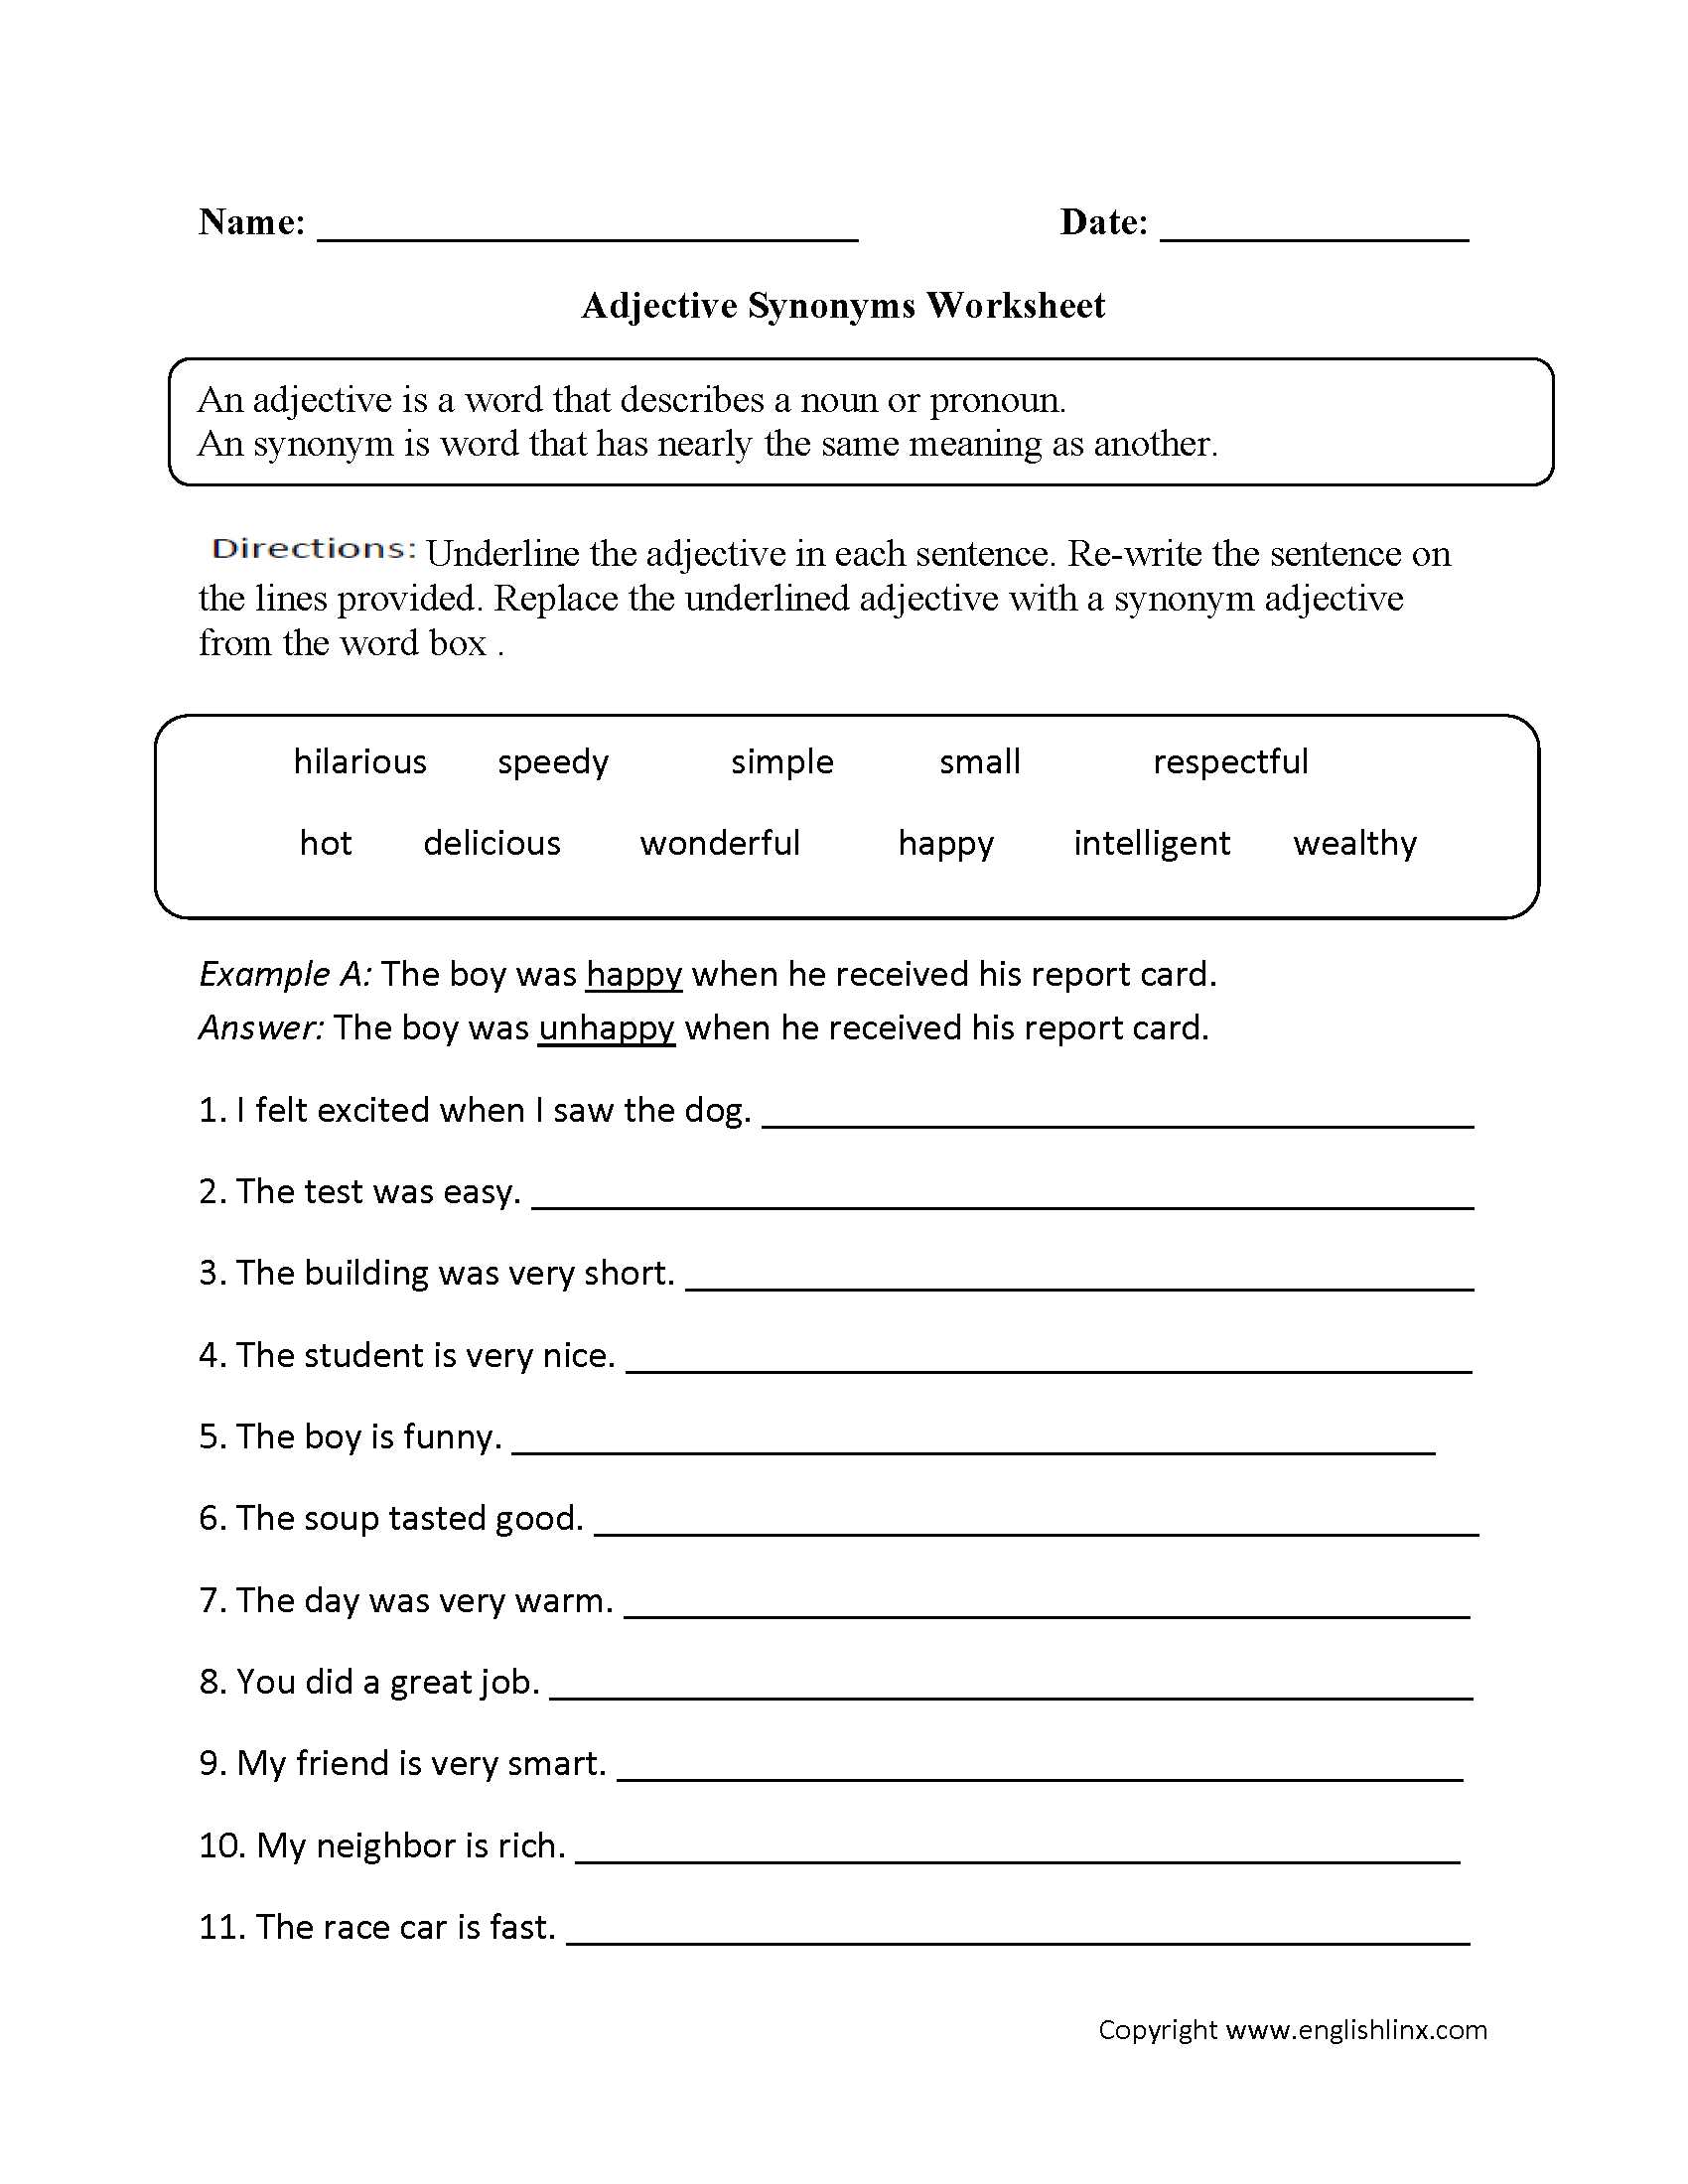 Identifying Parts Of Speech Worksheet and Free Parts Speech Worksheets the Best Worksheets Image Collection